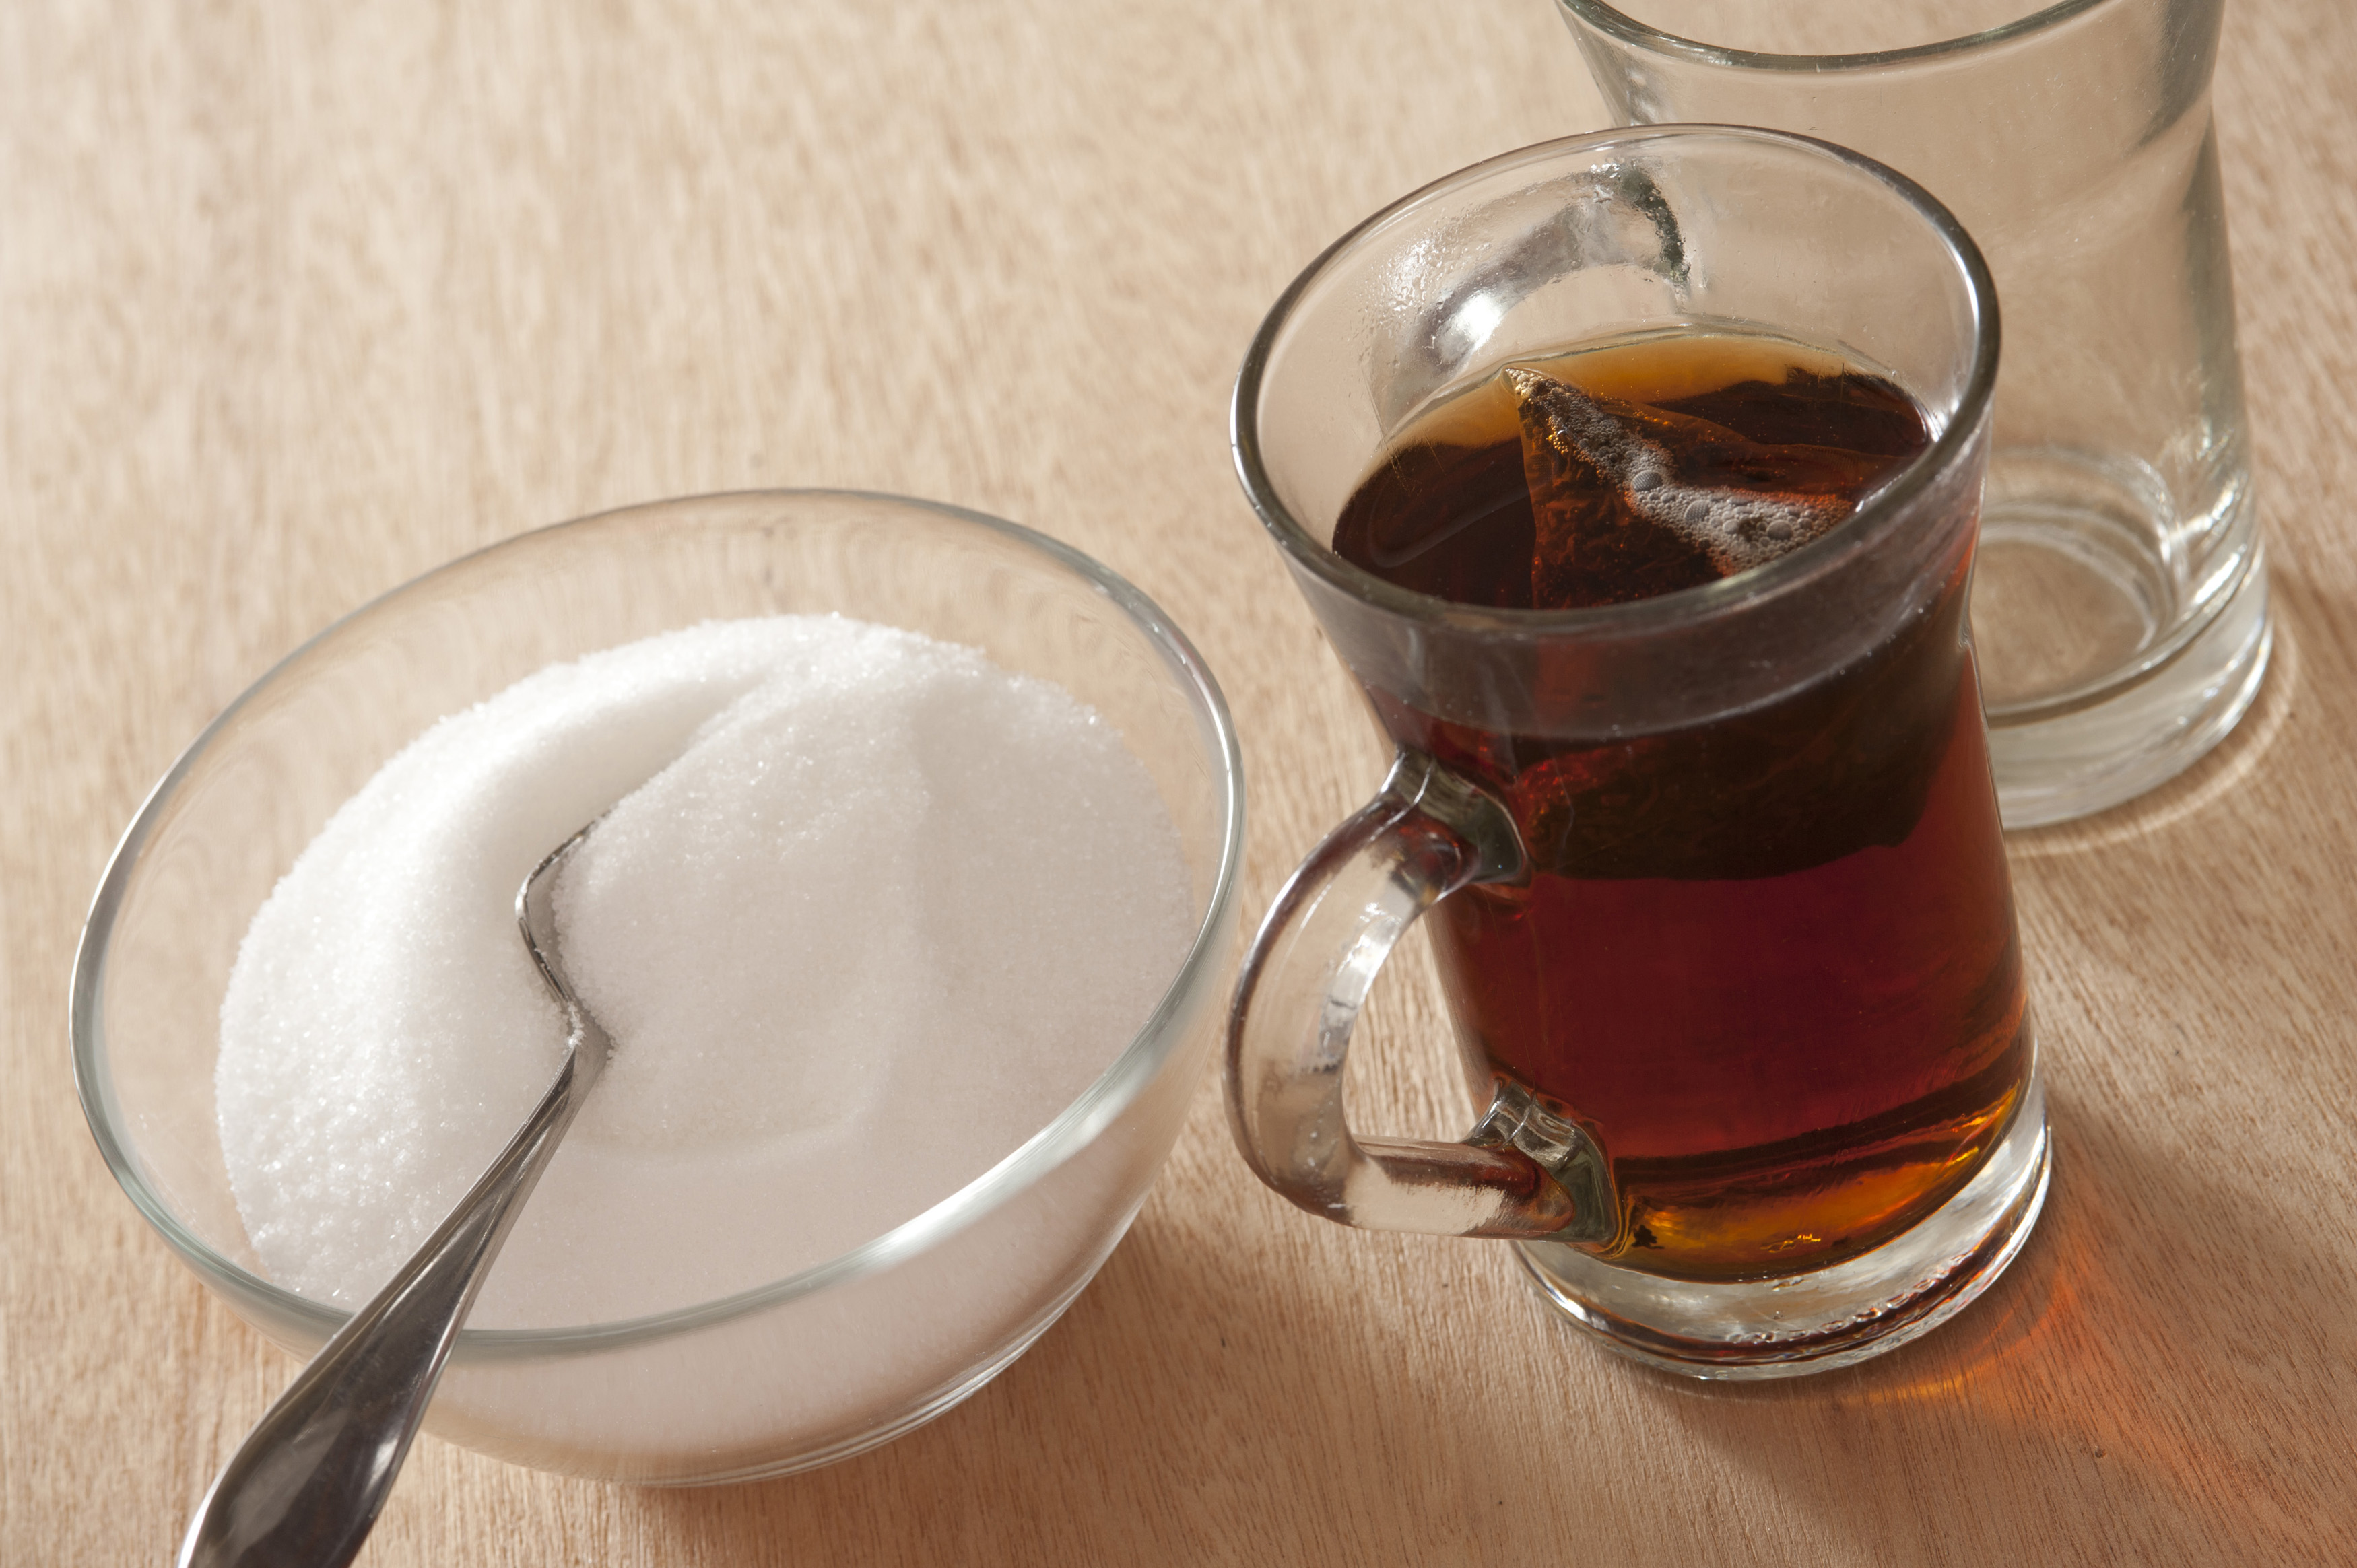 Sugary tea and fruit juices linked to cancer